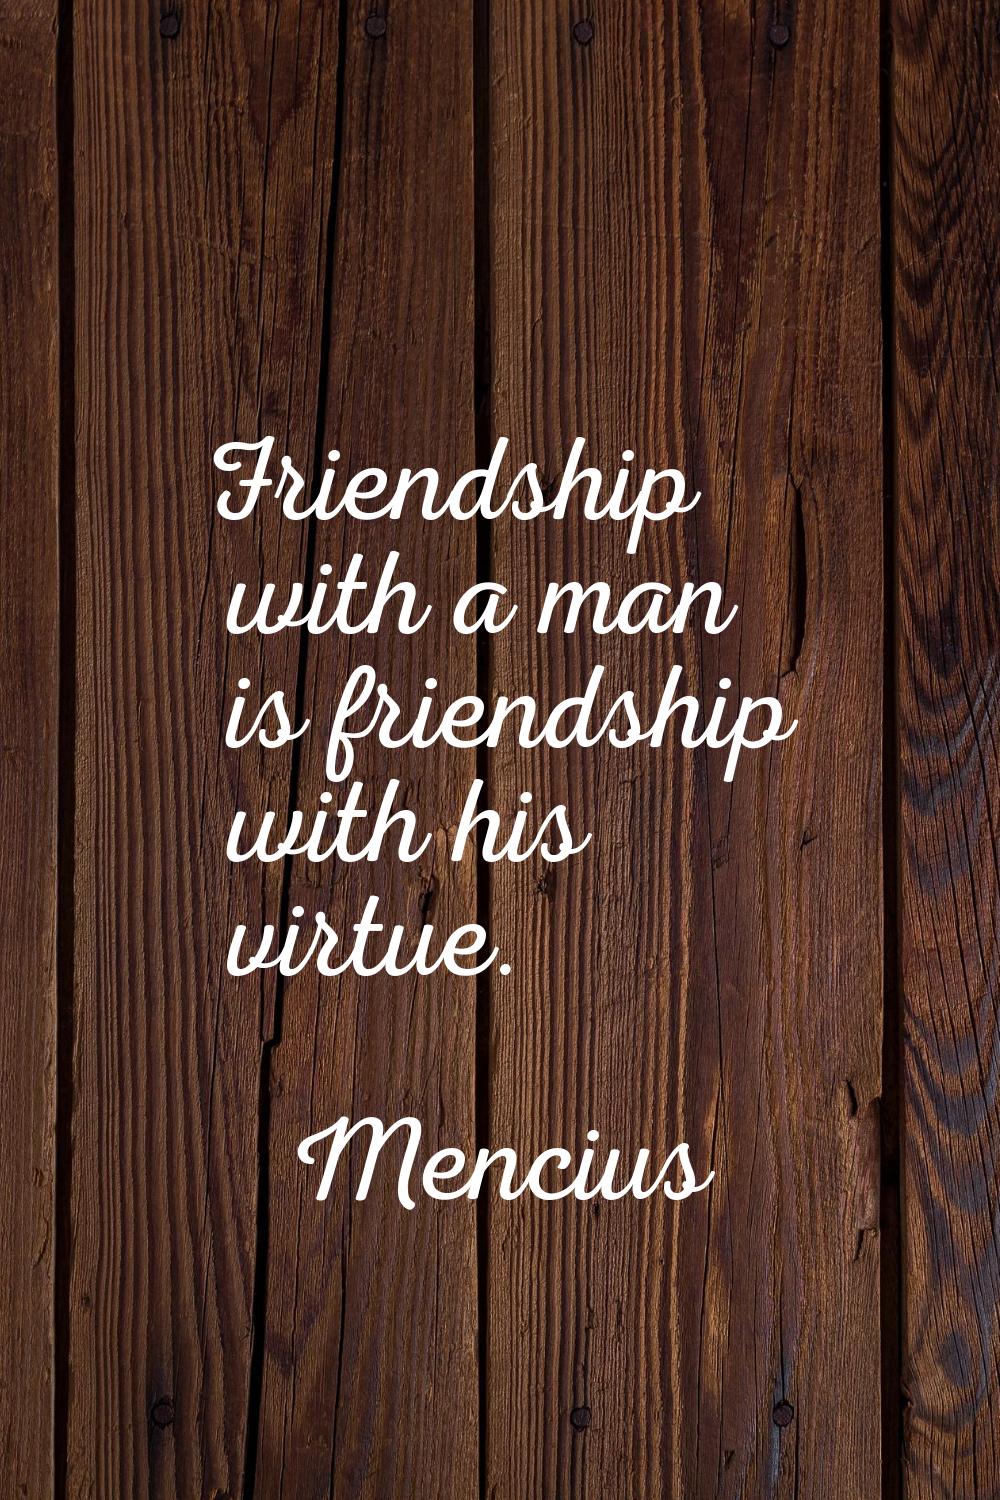 Friendship with a man is friendship with his virtue.